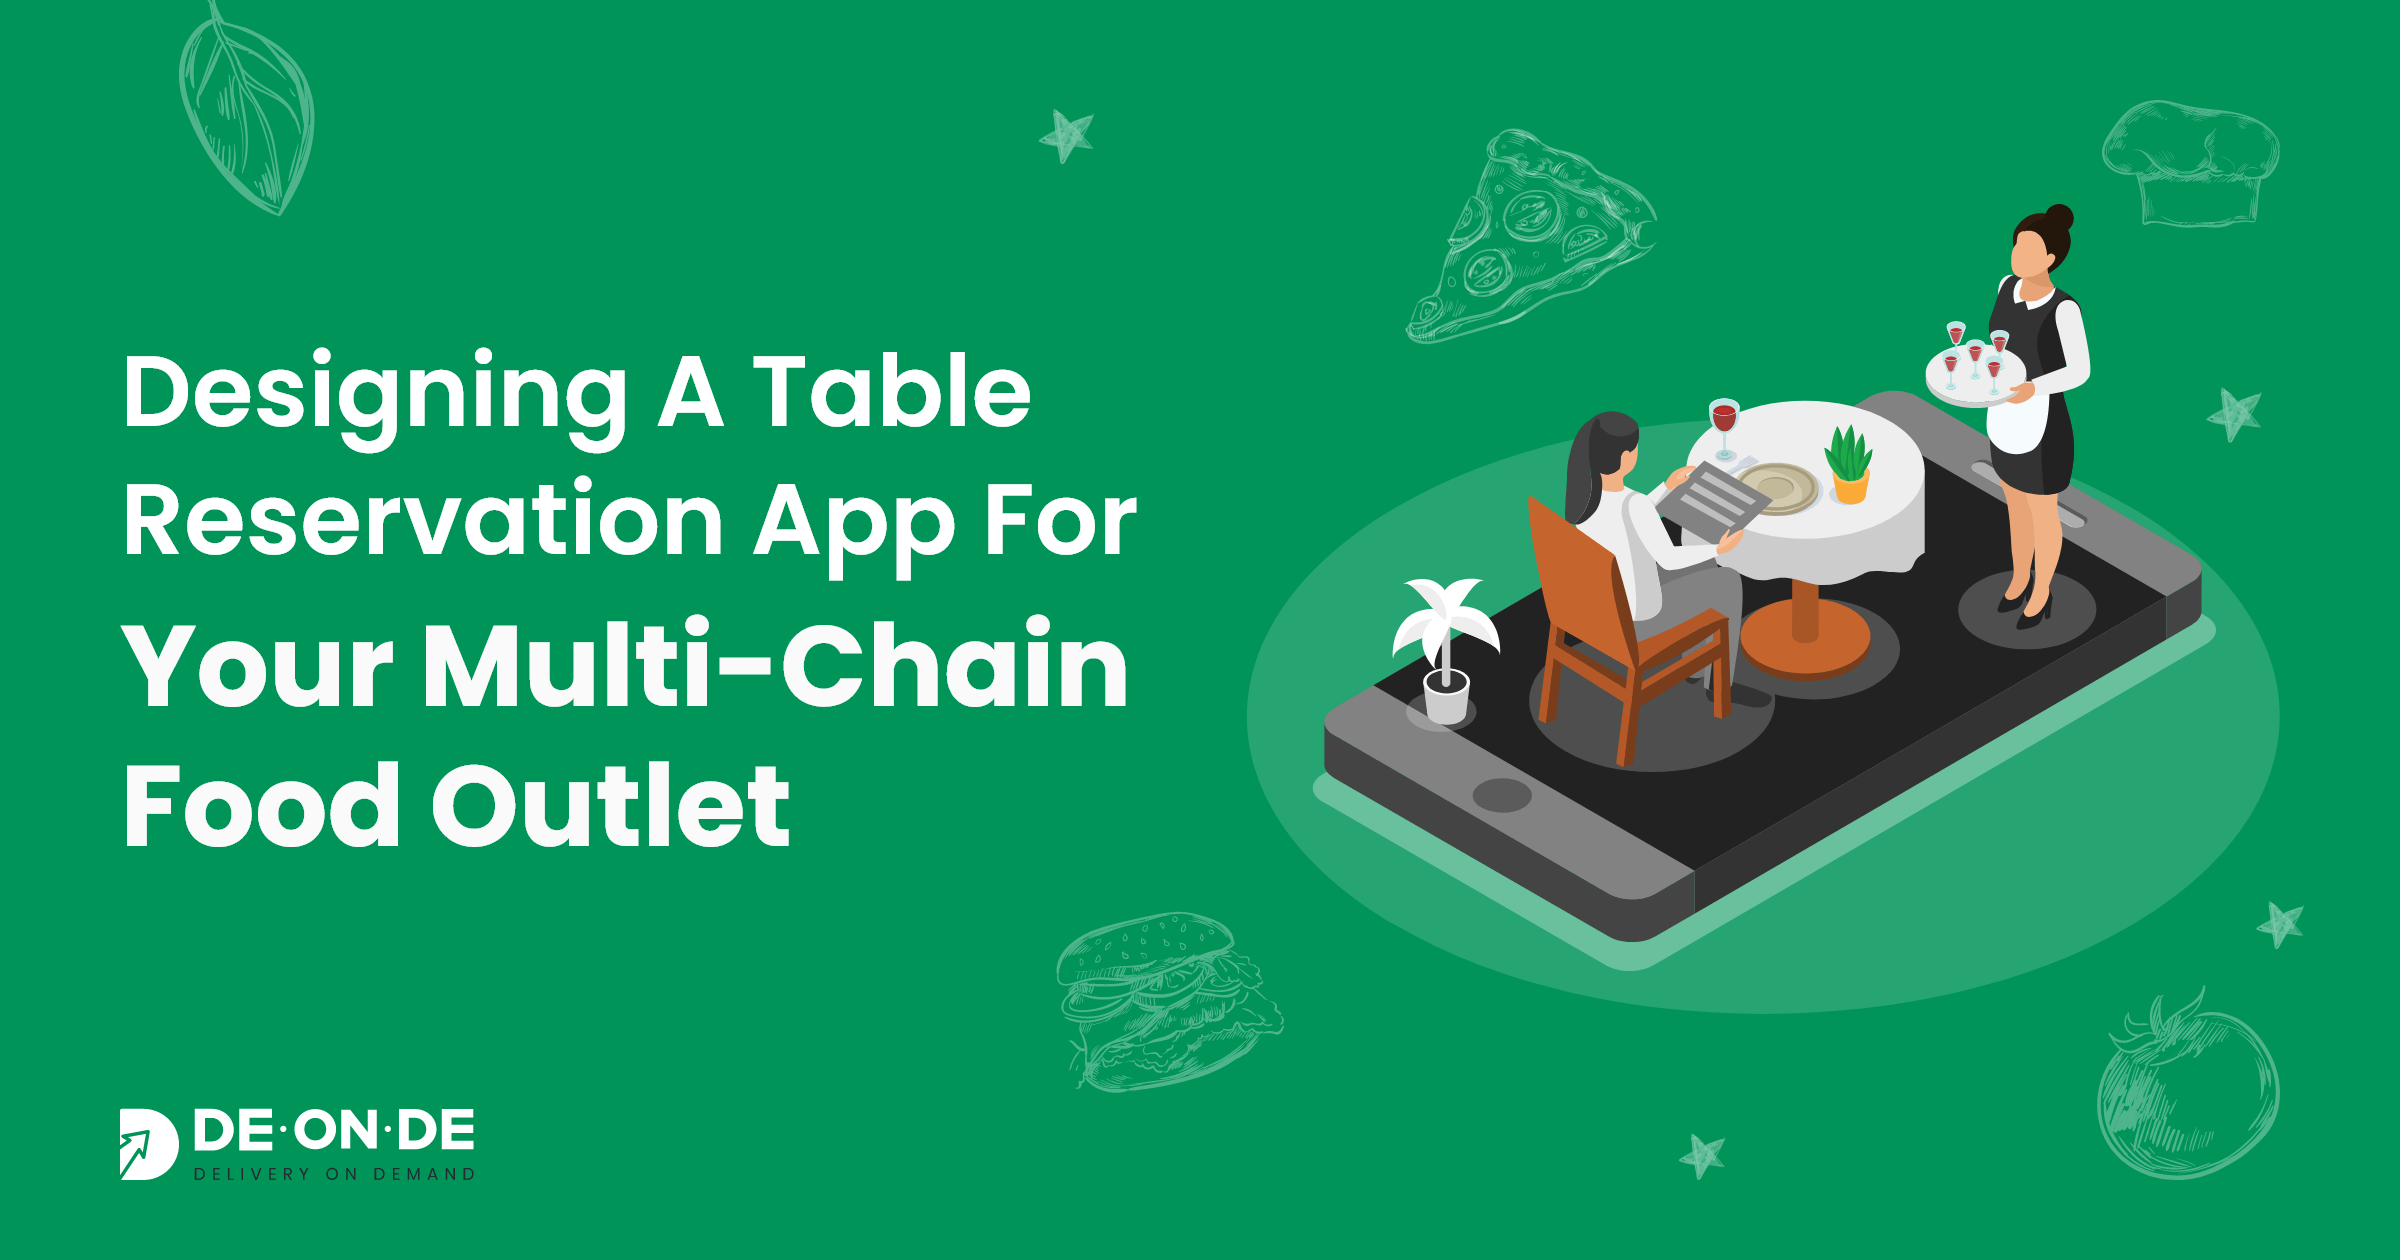 blog-Designing-a-Table-Reservation-App-For-Your-Multi-Chain-Food-Outlet.png